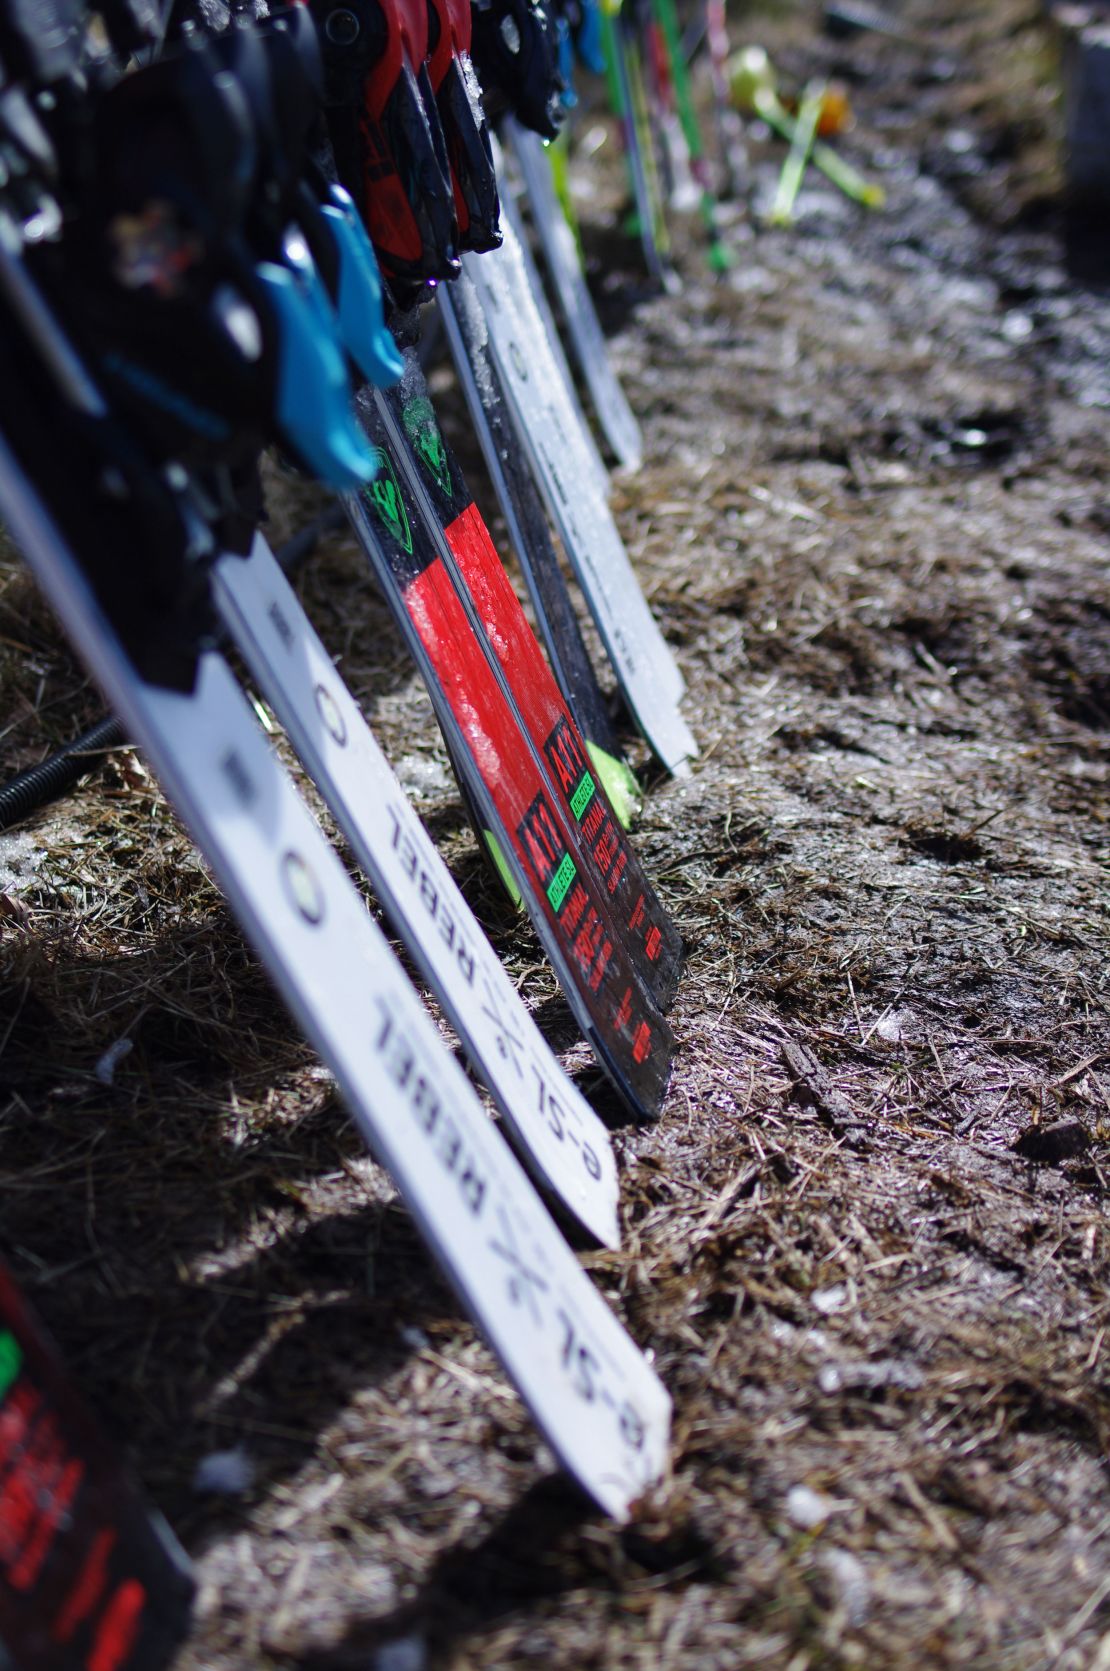 Skis in the muddy ground at Campo Felice.